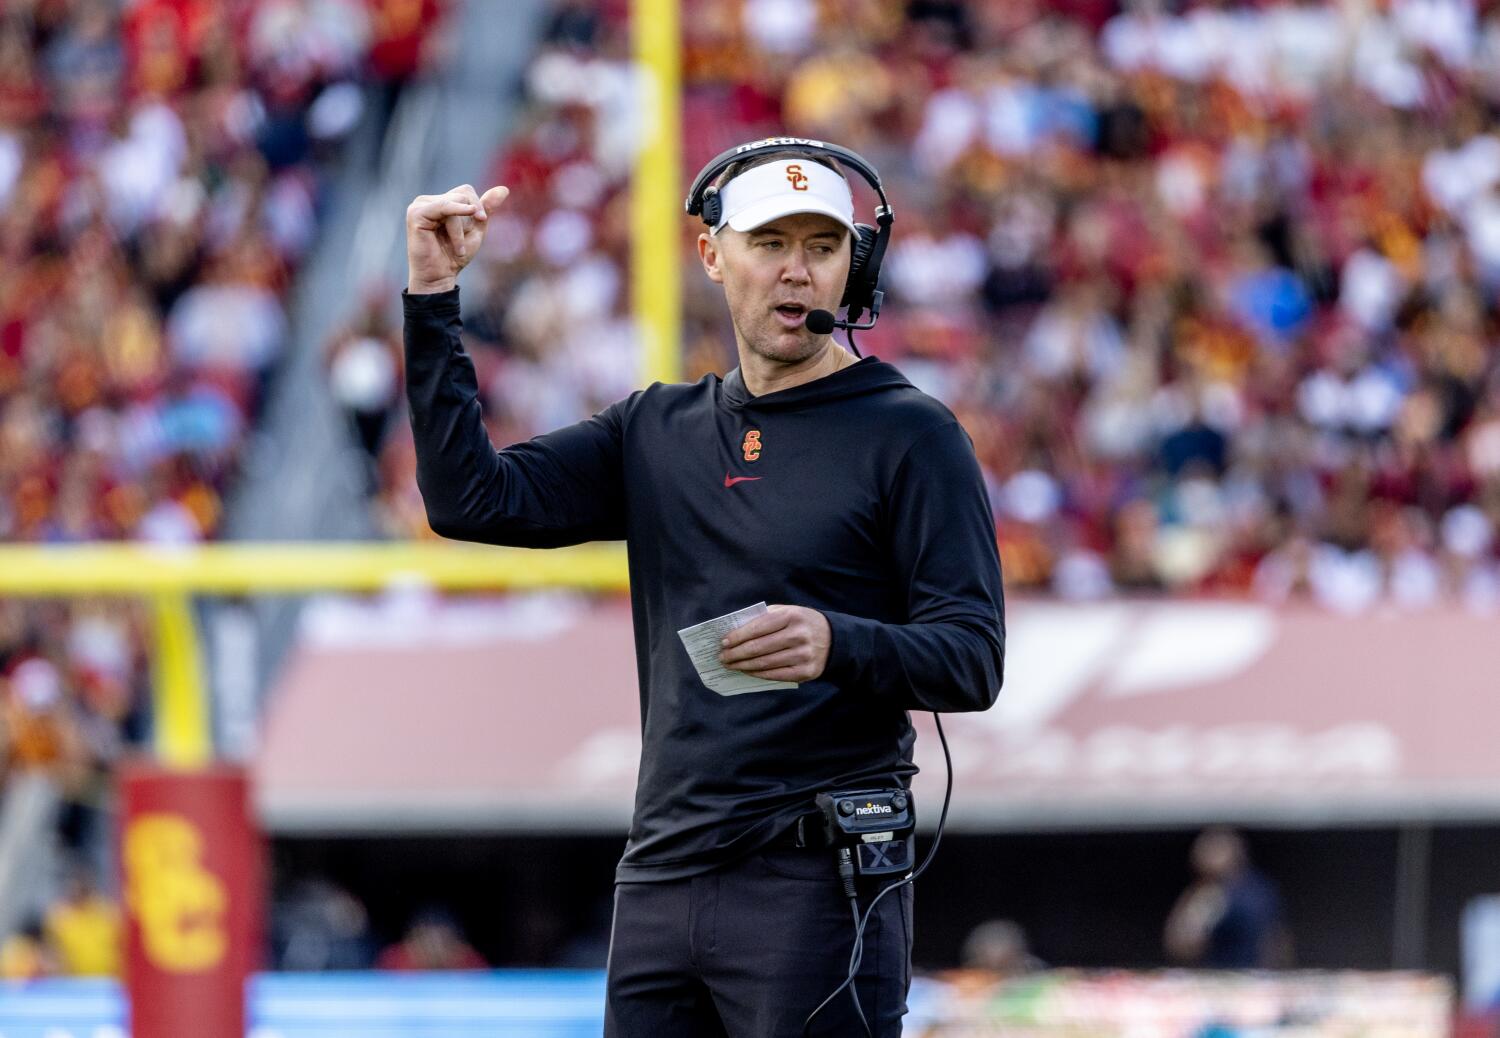 USC paid nearly $20 million in 2022 to bring Lincoln Riley to L.A.